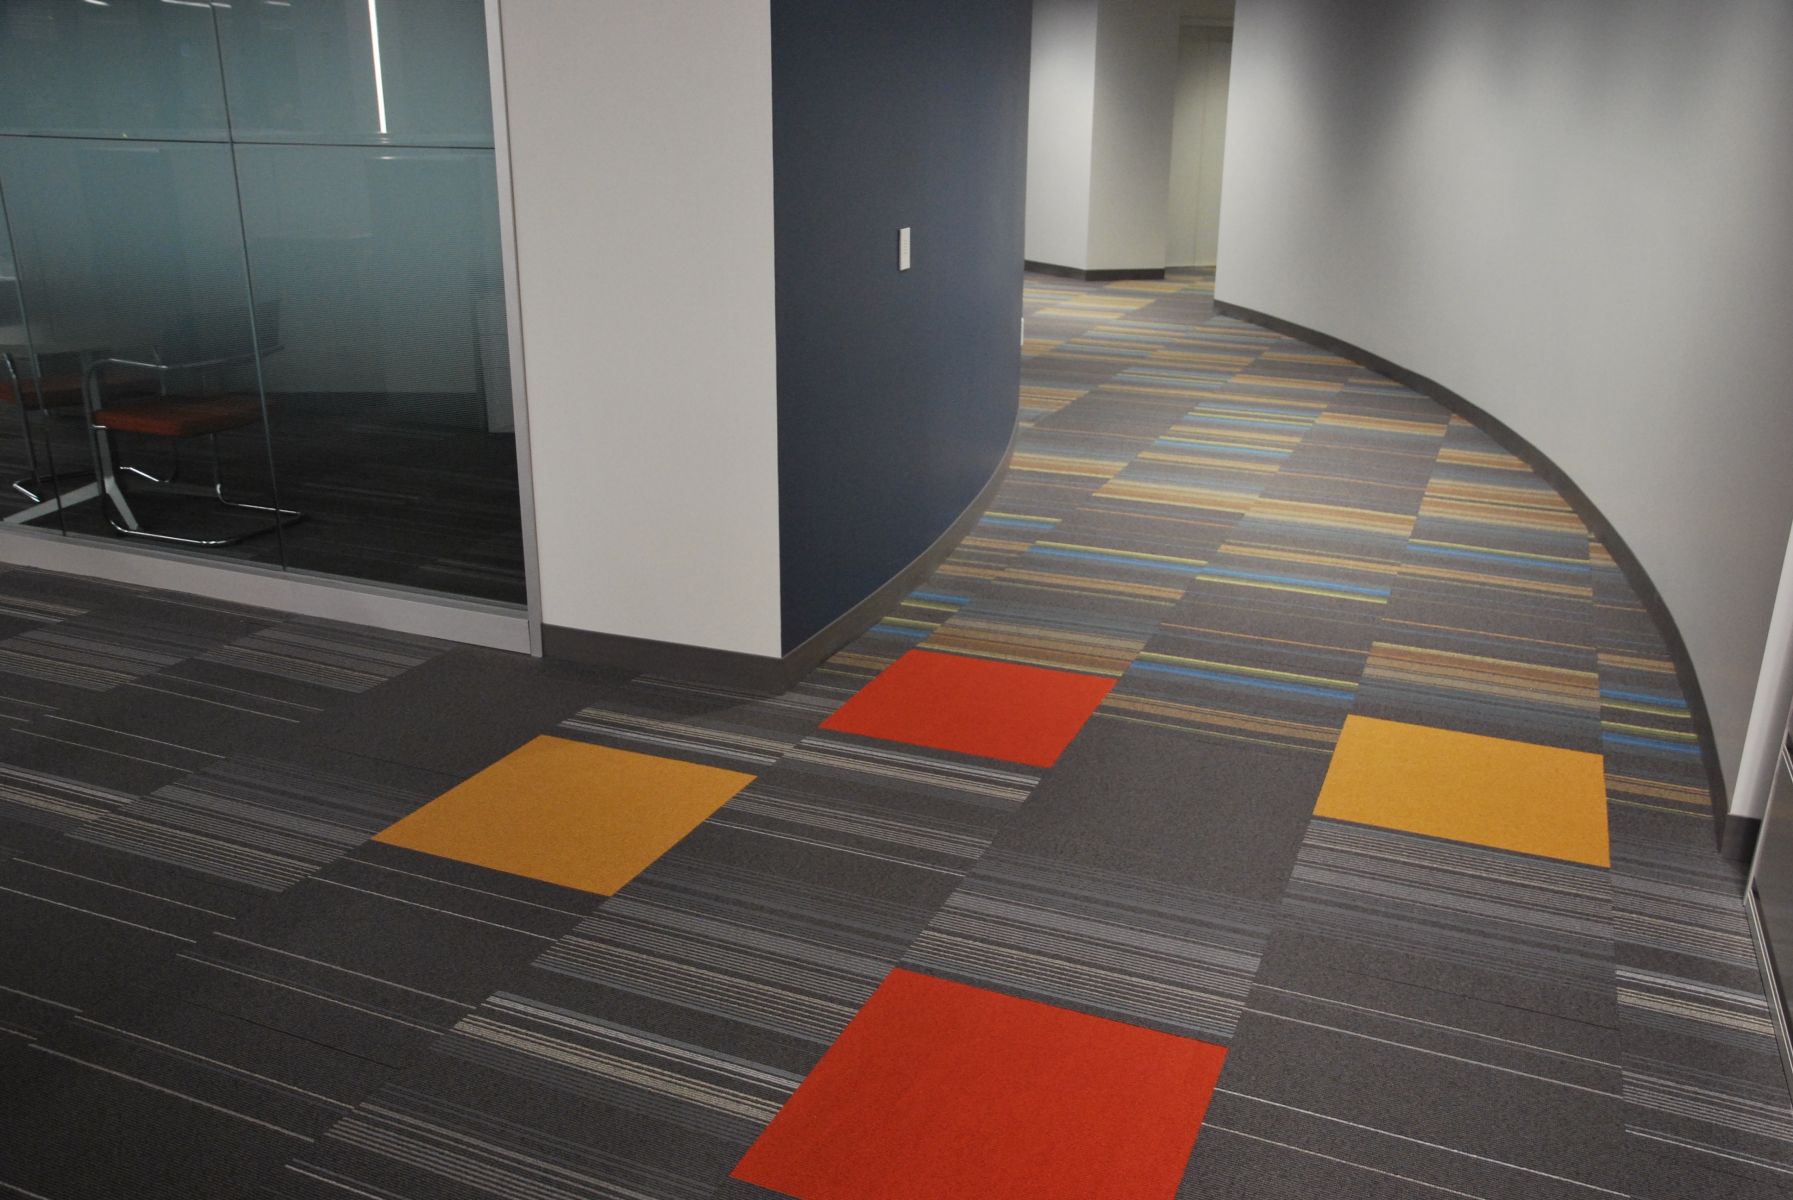 The Joint Commission’s clarity of circulation resulted in a clear path filled with carpet, accent walls, upholstery, and more